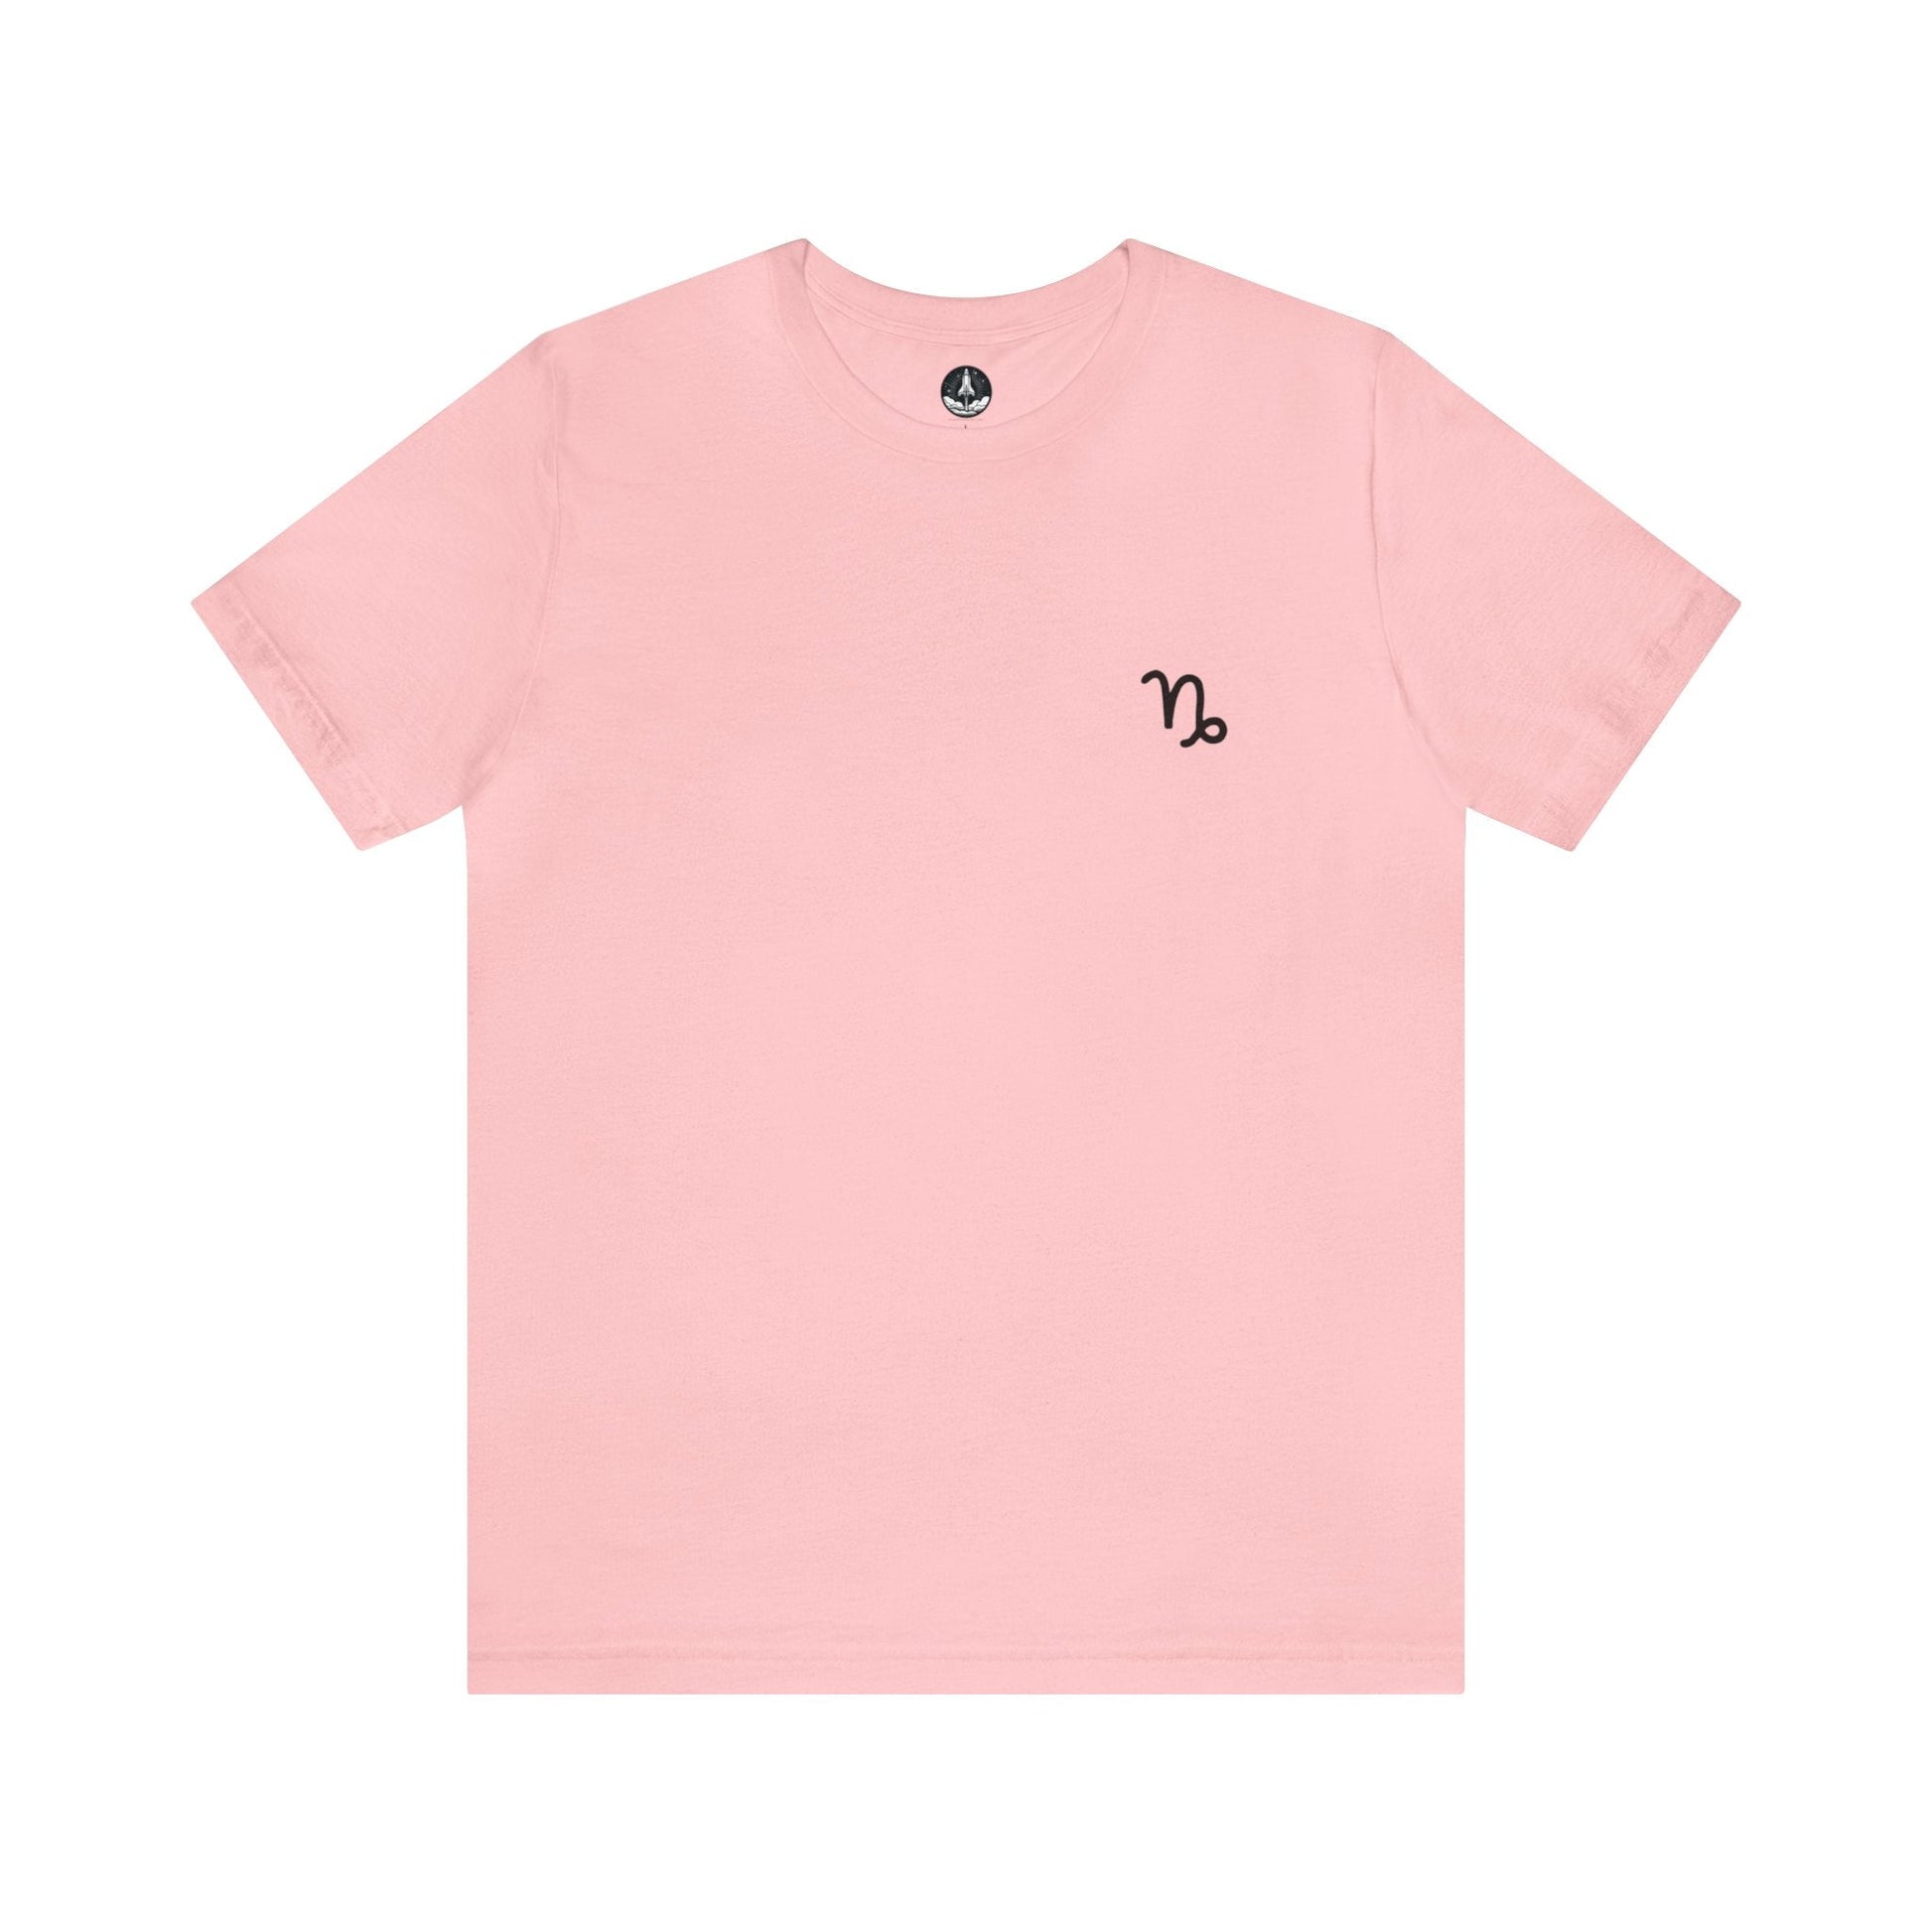 T-Shirt Pink / S Capricorn Mountain Glyph T-Shirt: Peak Style for the Determined Climber